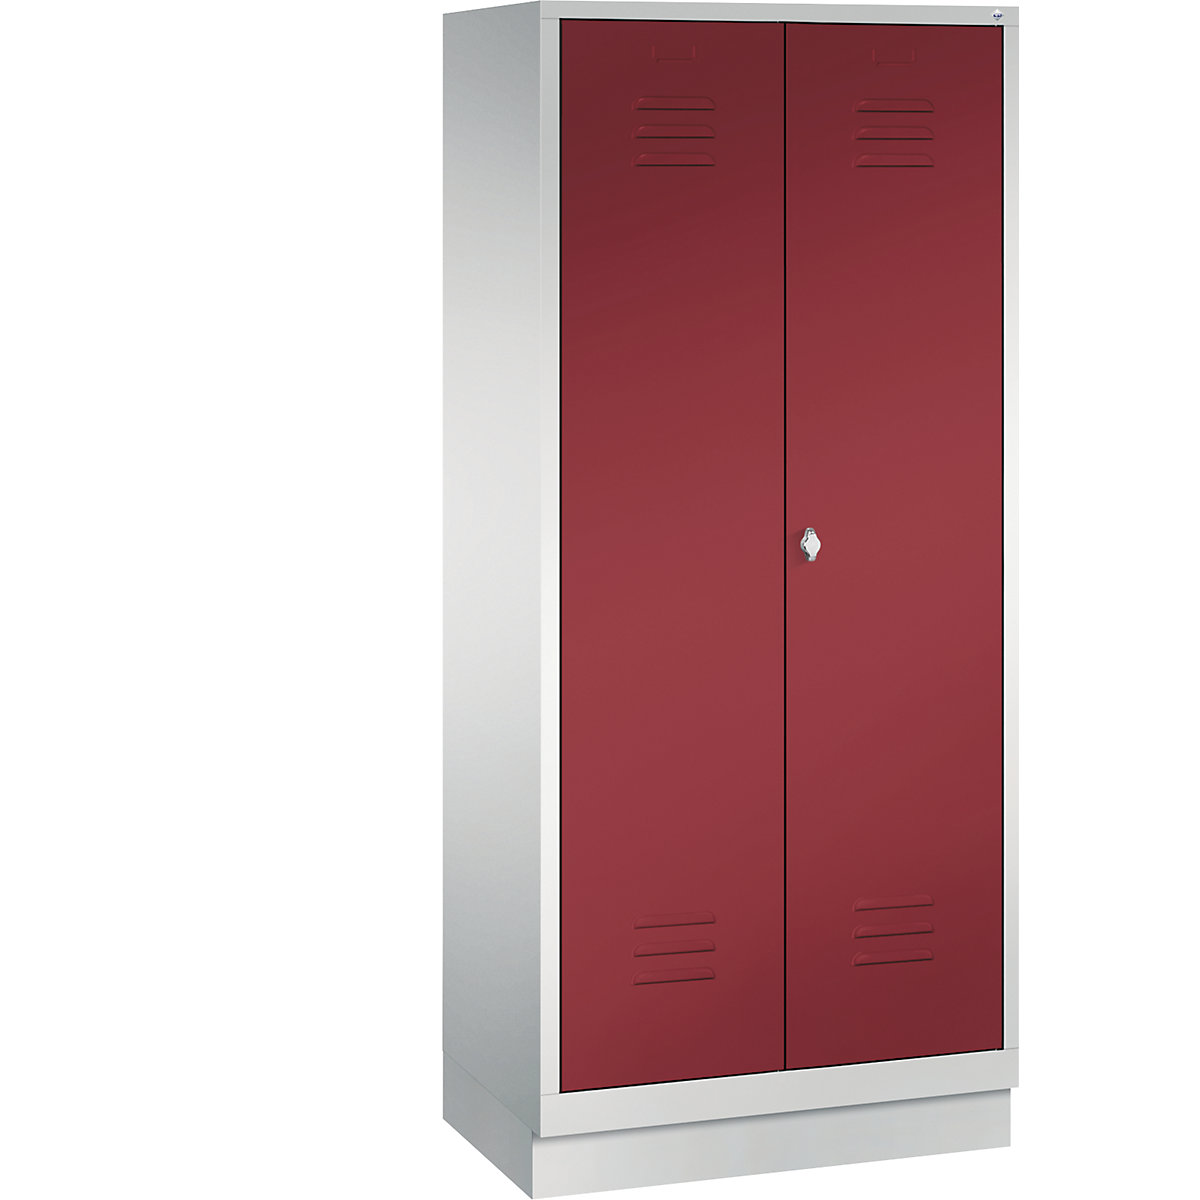 CLASSIC storage cupboard with plinth, doors close in the middle – C+P, 2 compartments, compartment width 400 mm, light grey / ruby red-3